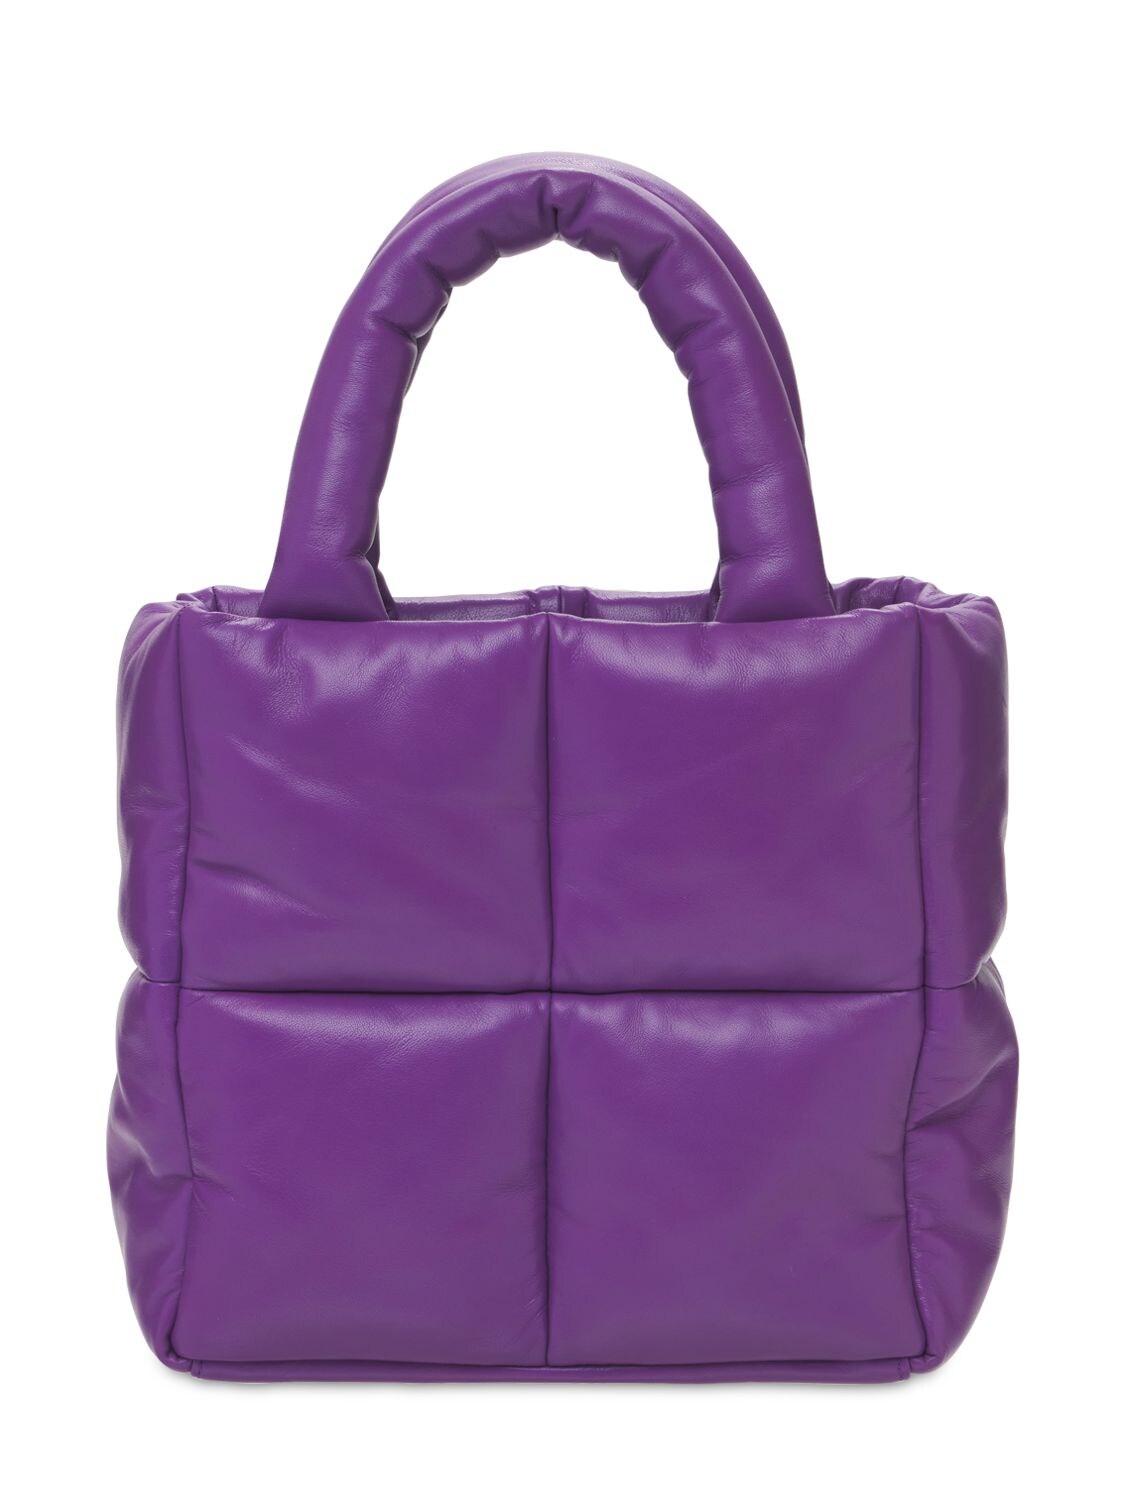 Stand Studio Rosanne Quilted Leather Tote Bag In Topaz Purple